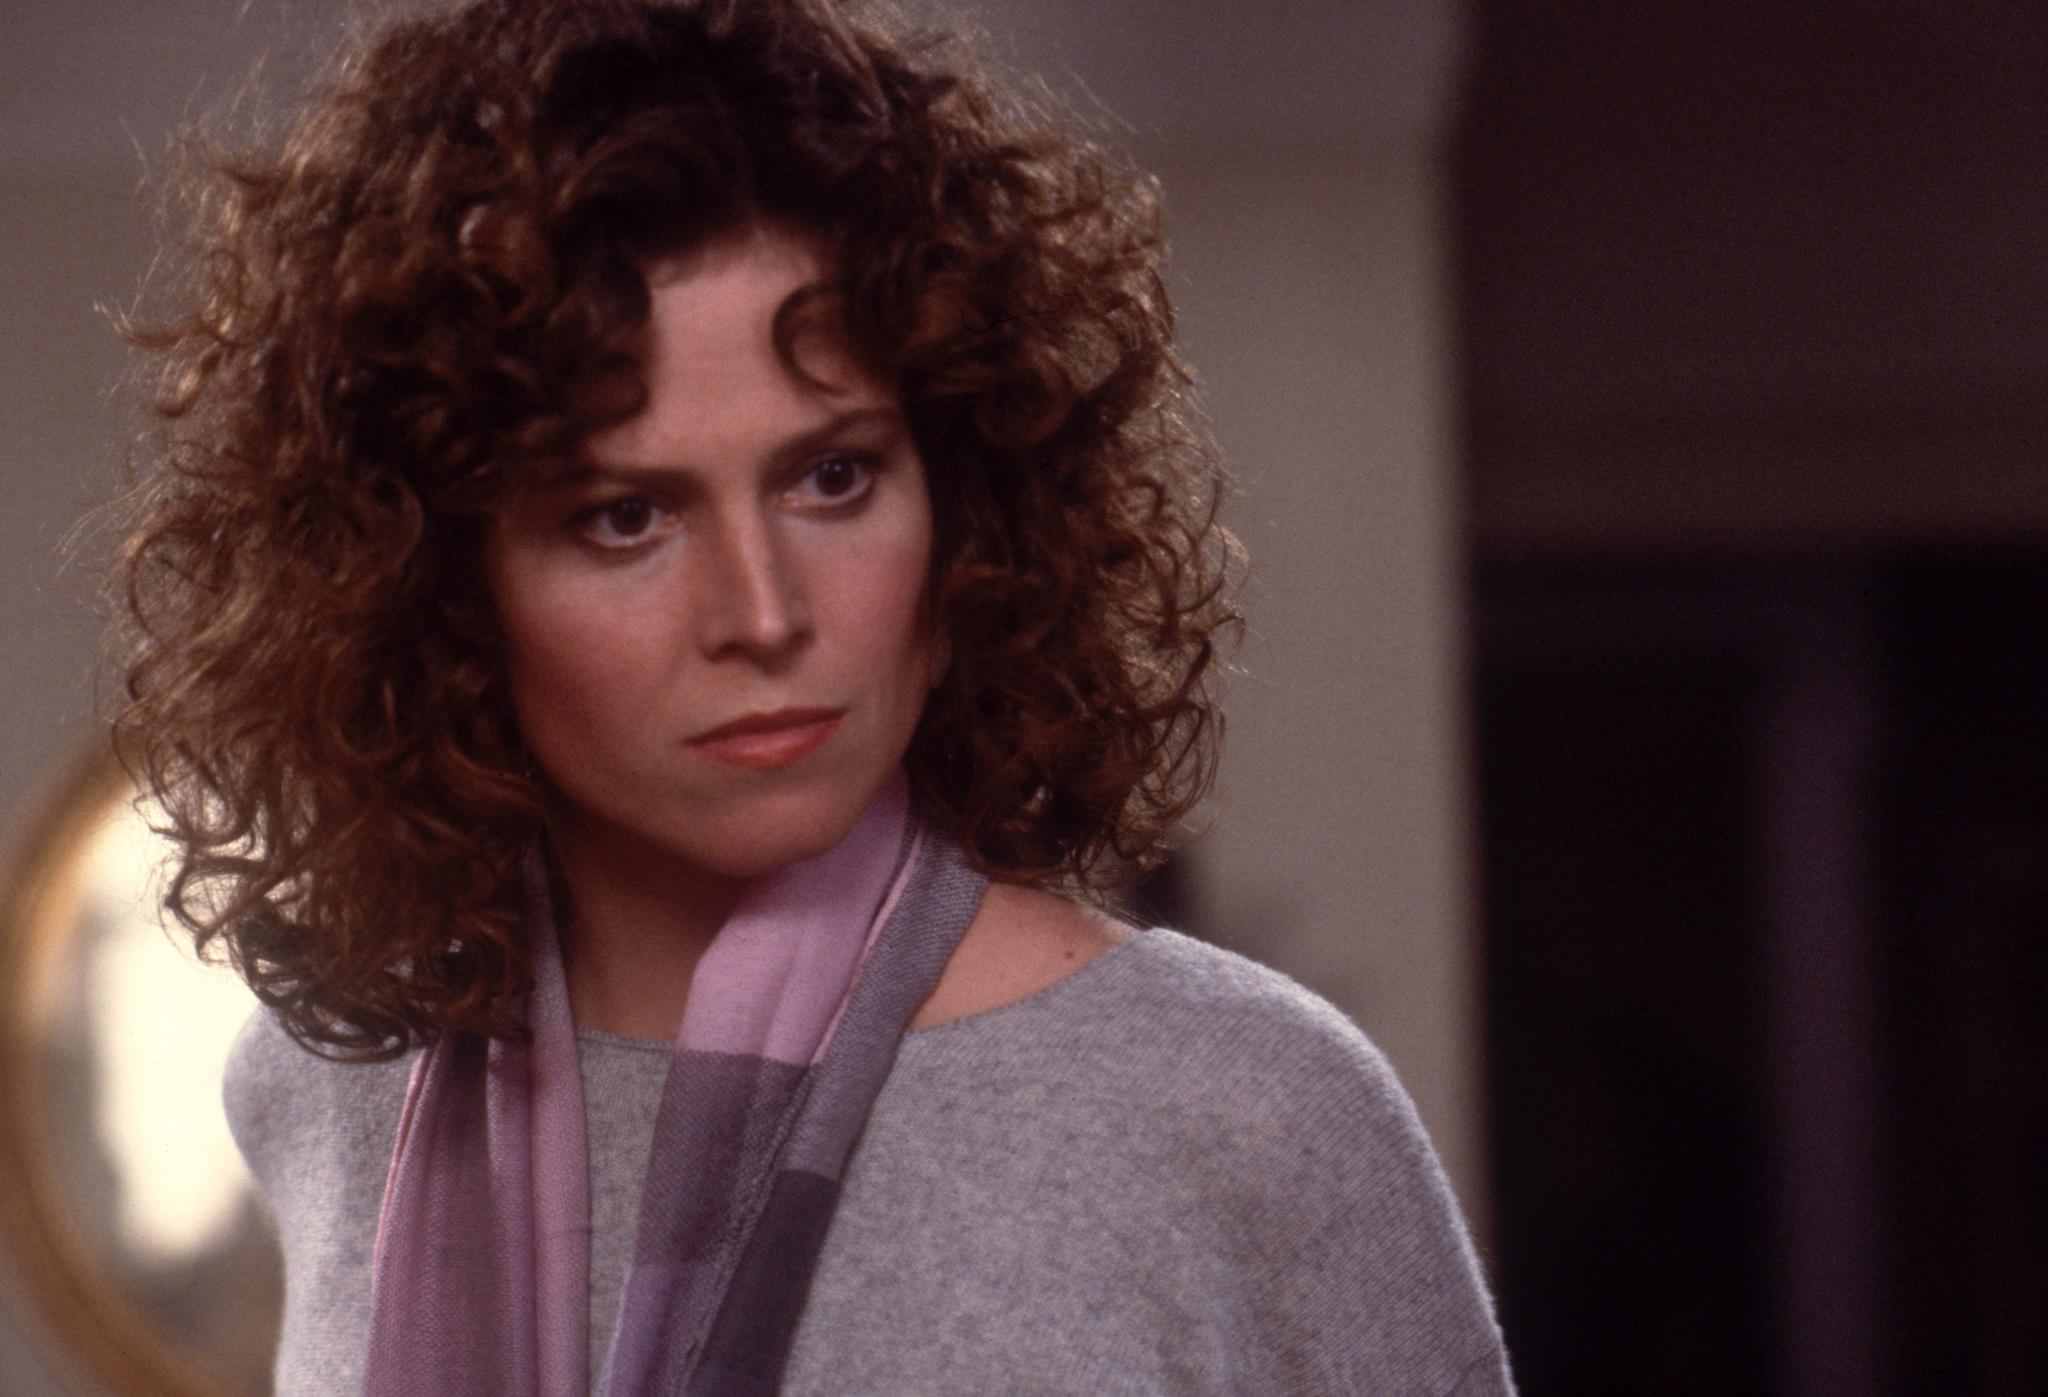 sigourney-weaver-in-ghostbusters-1984-large-picture.jpg